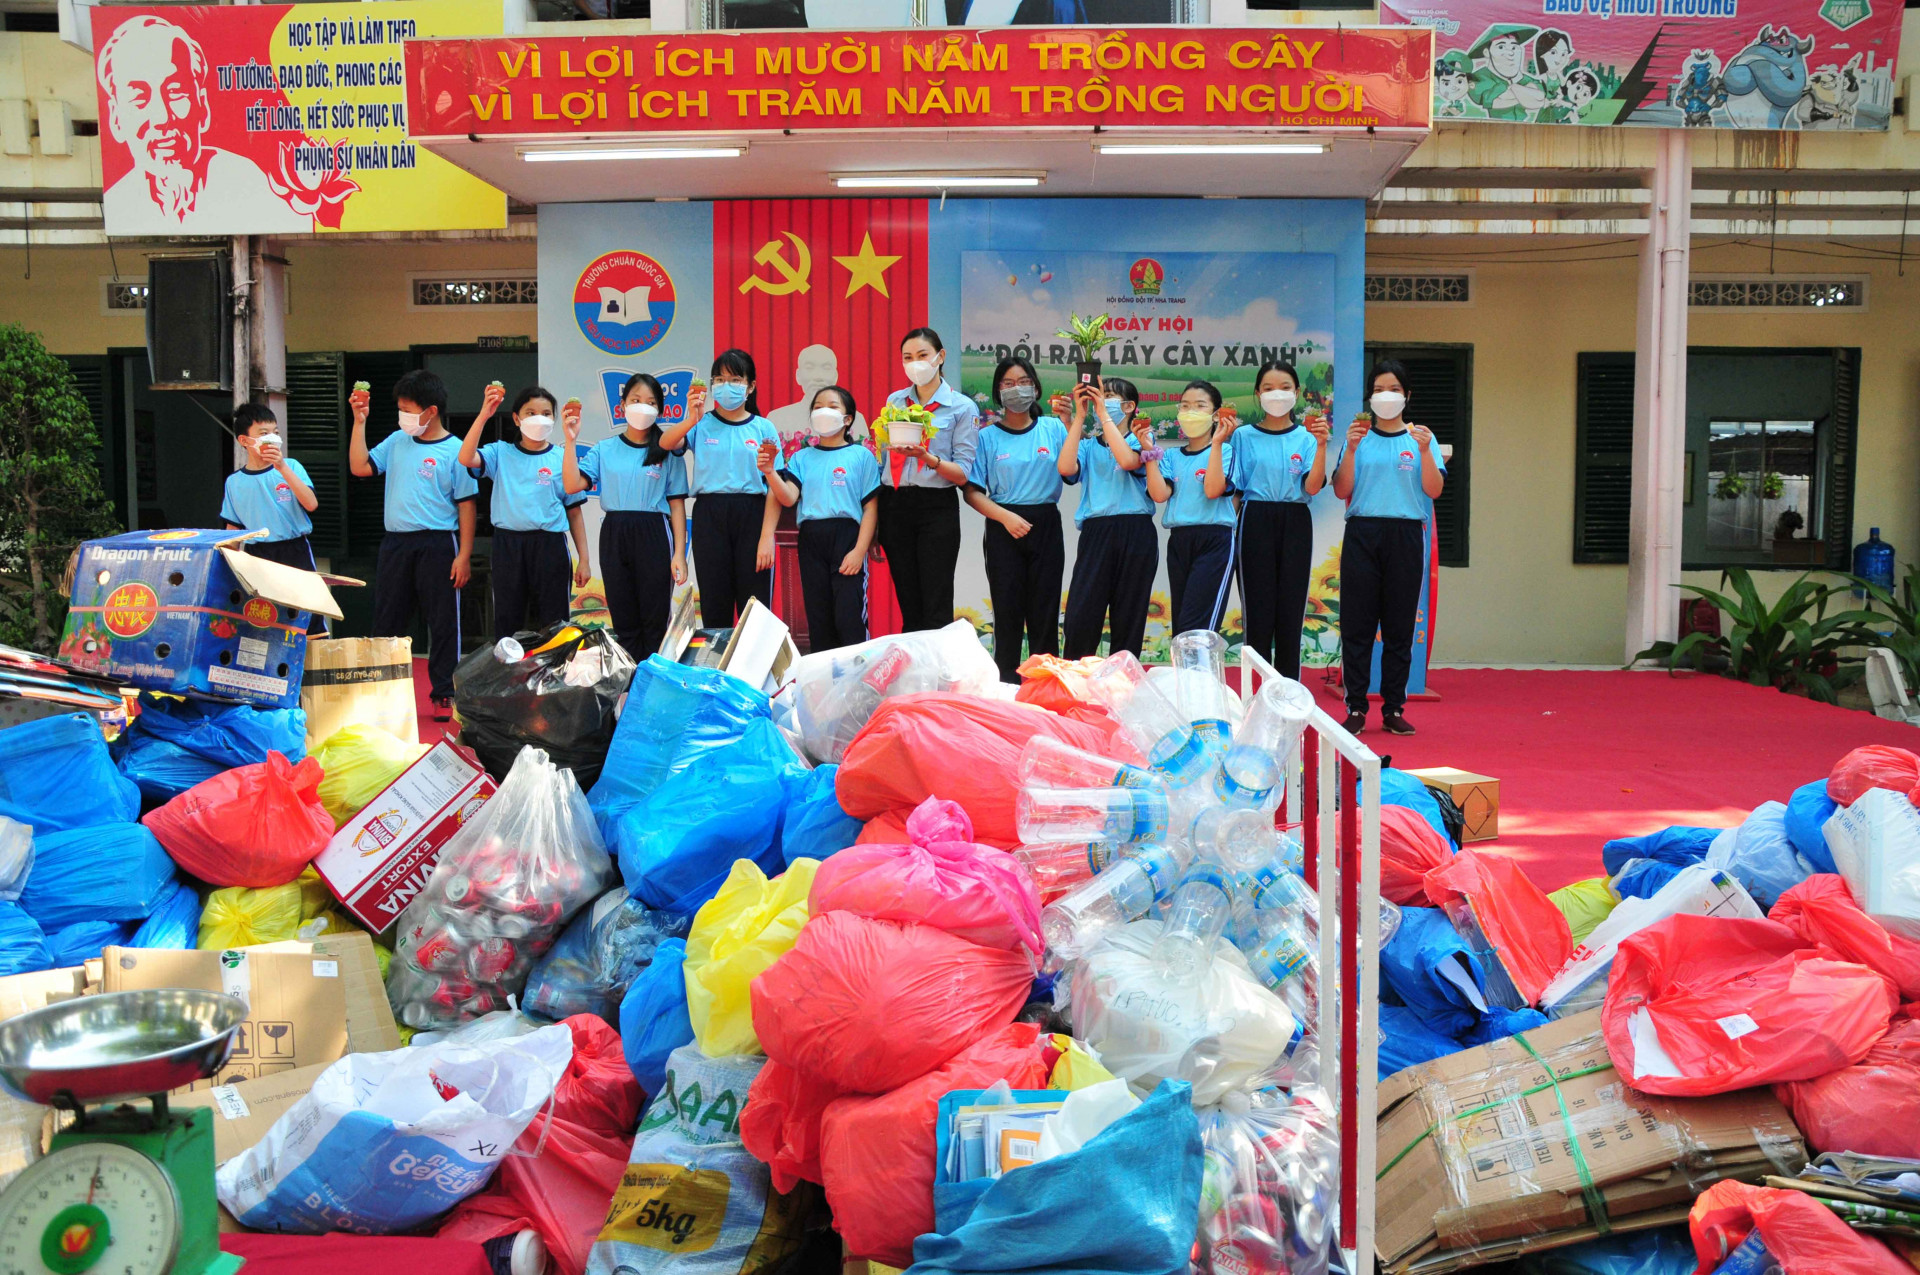 1,558kg of used paper, 42kg of empty cans and 48kg of plastic things are collected.